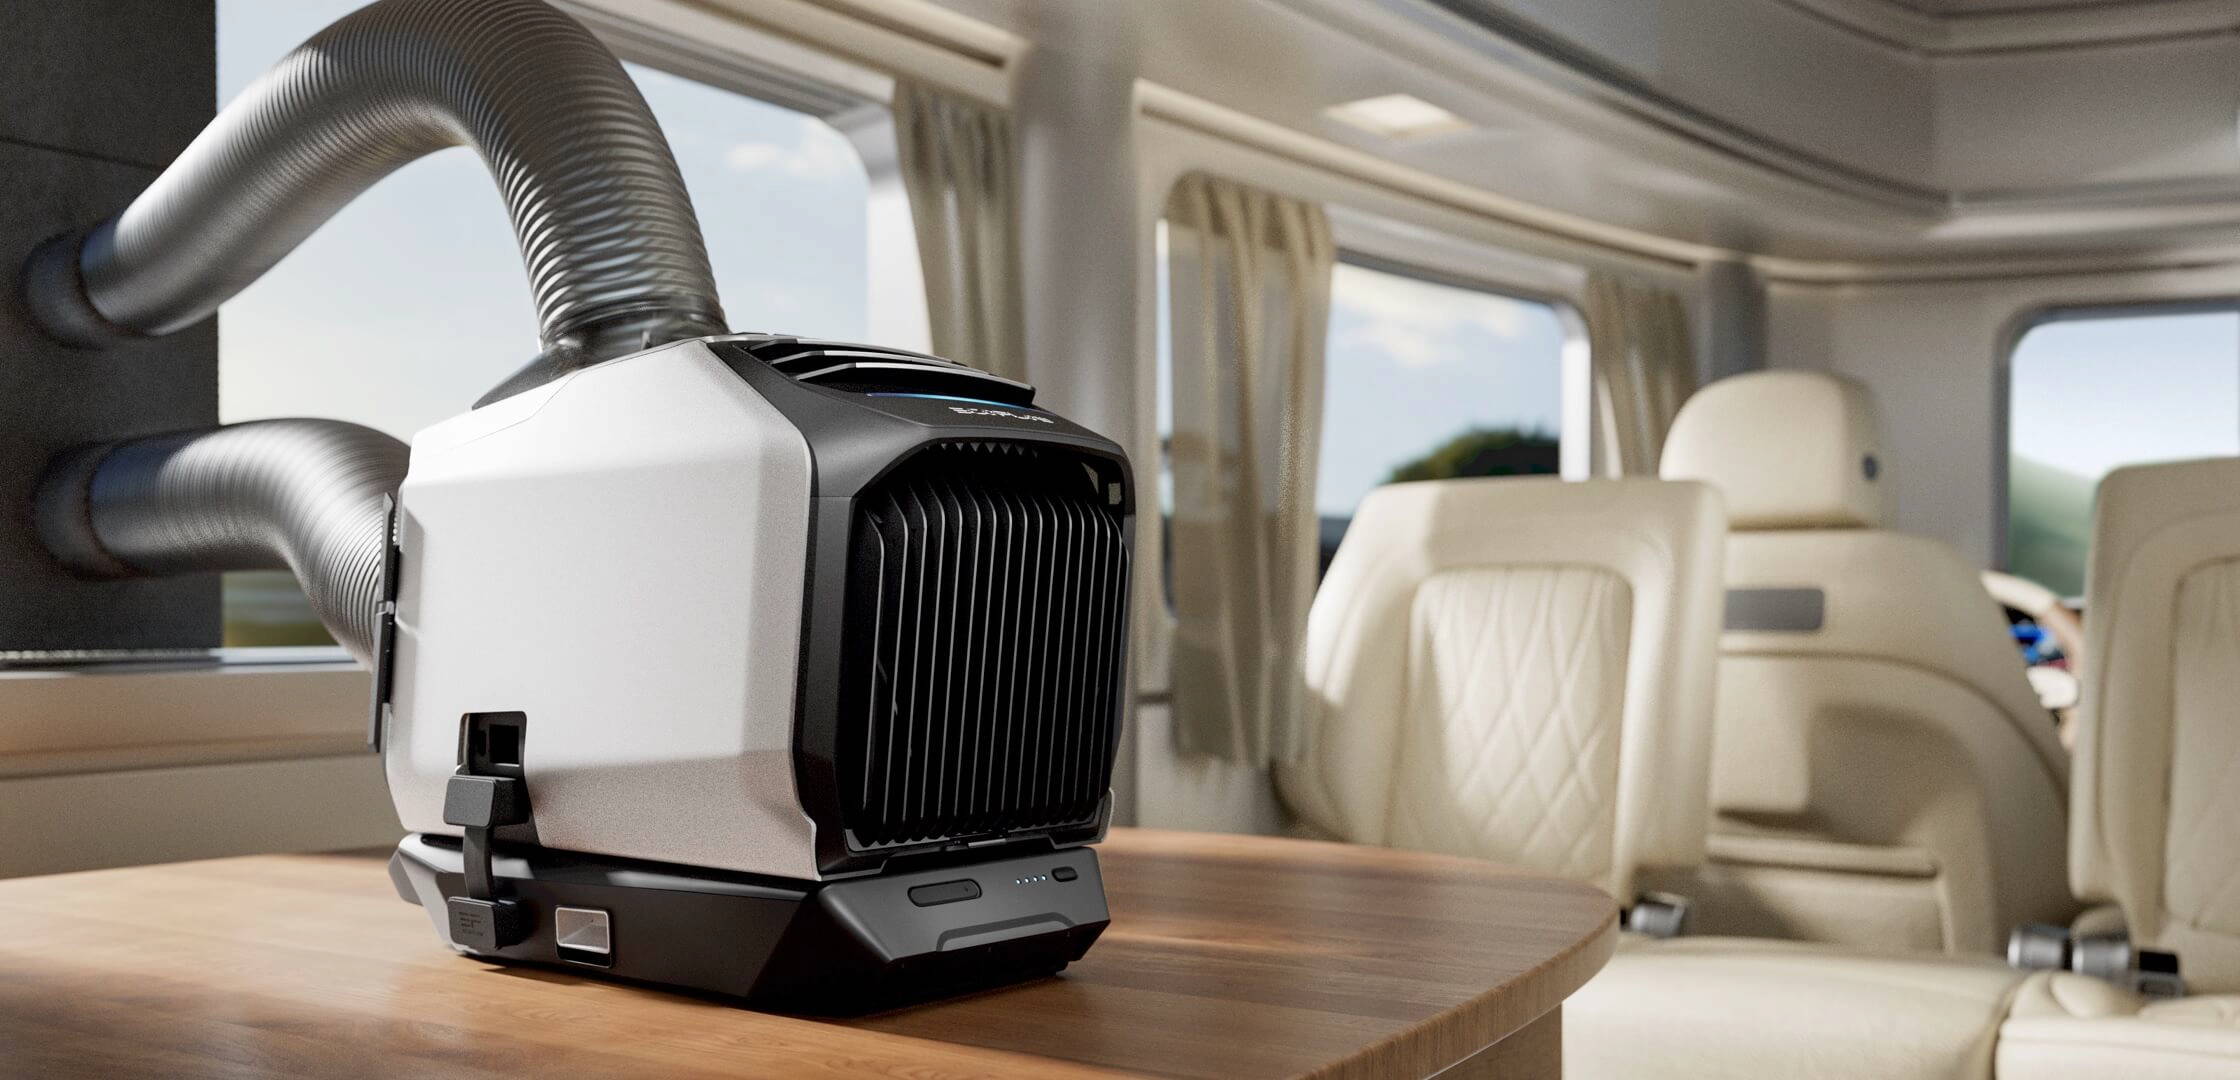 The ecoflow wave 2 portable air conditioner with inlet and outlet pipes cooling a campervan